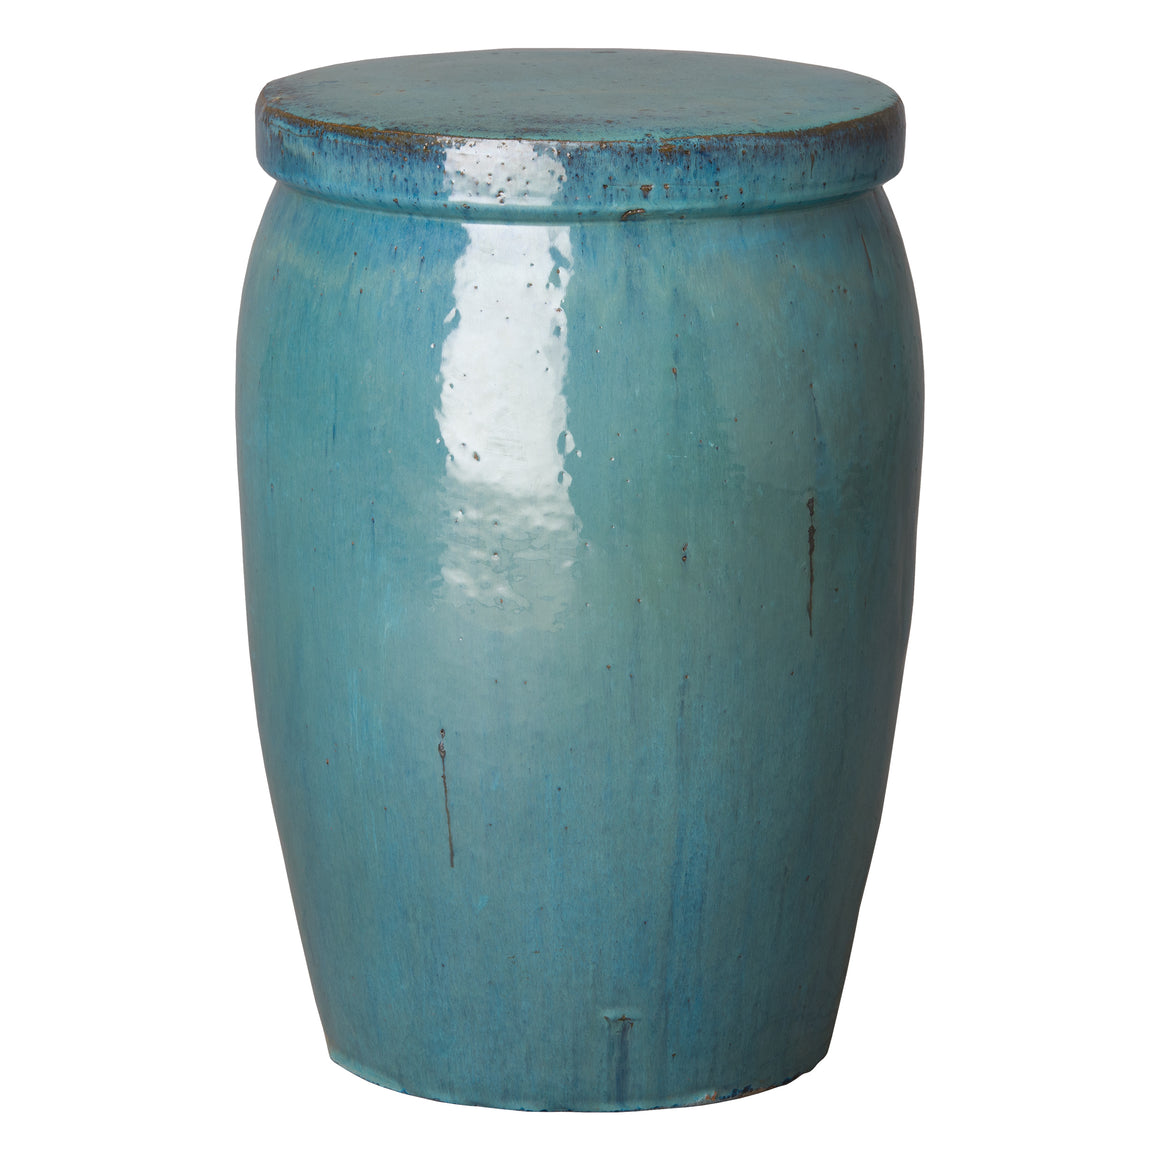 Drum Garden Stool/Table with a Teal Glaze